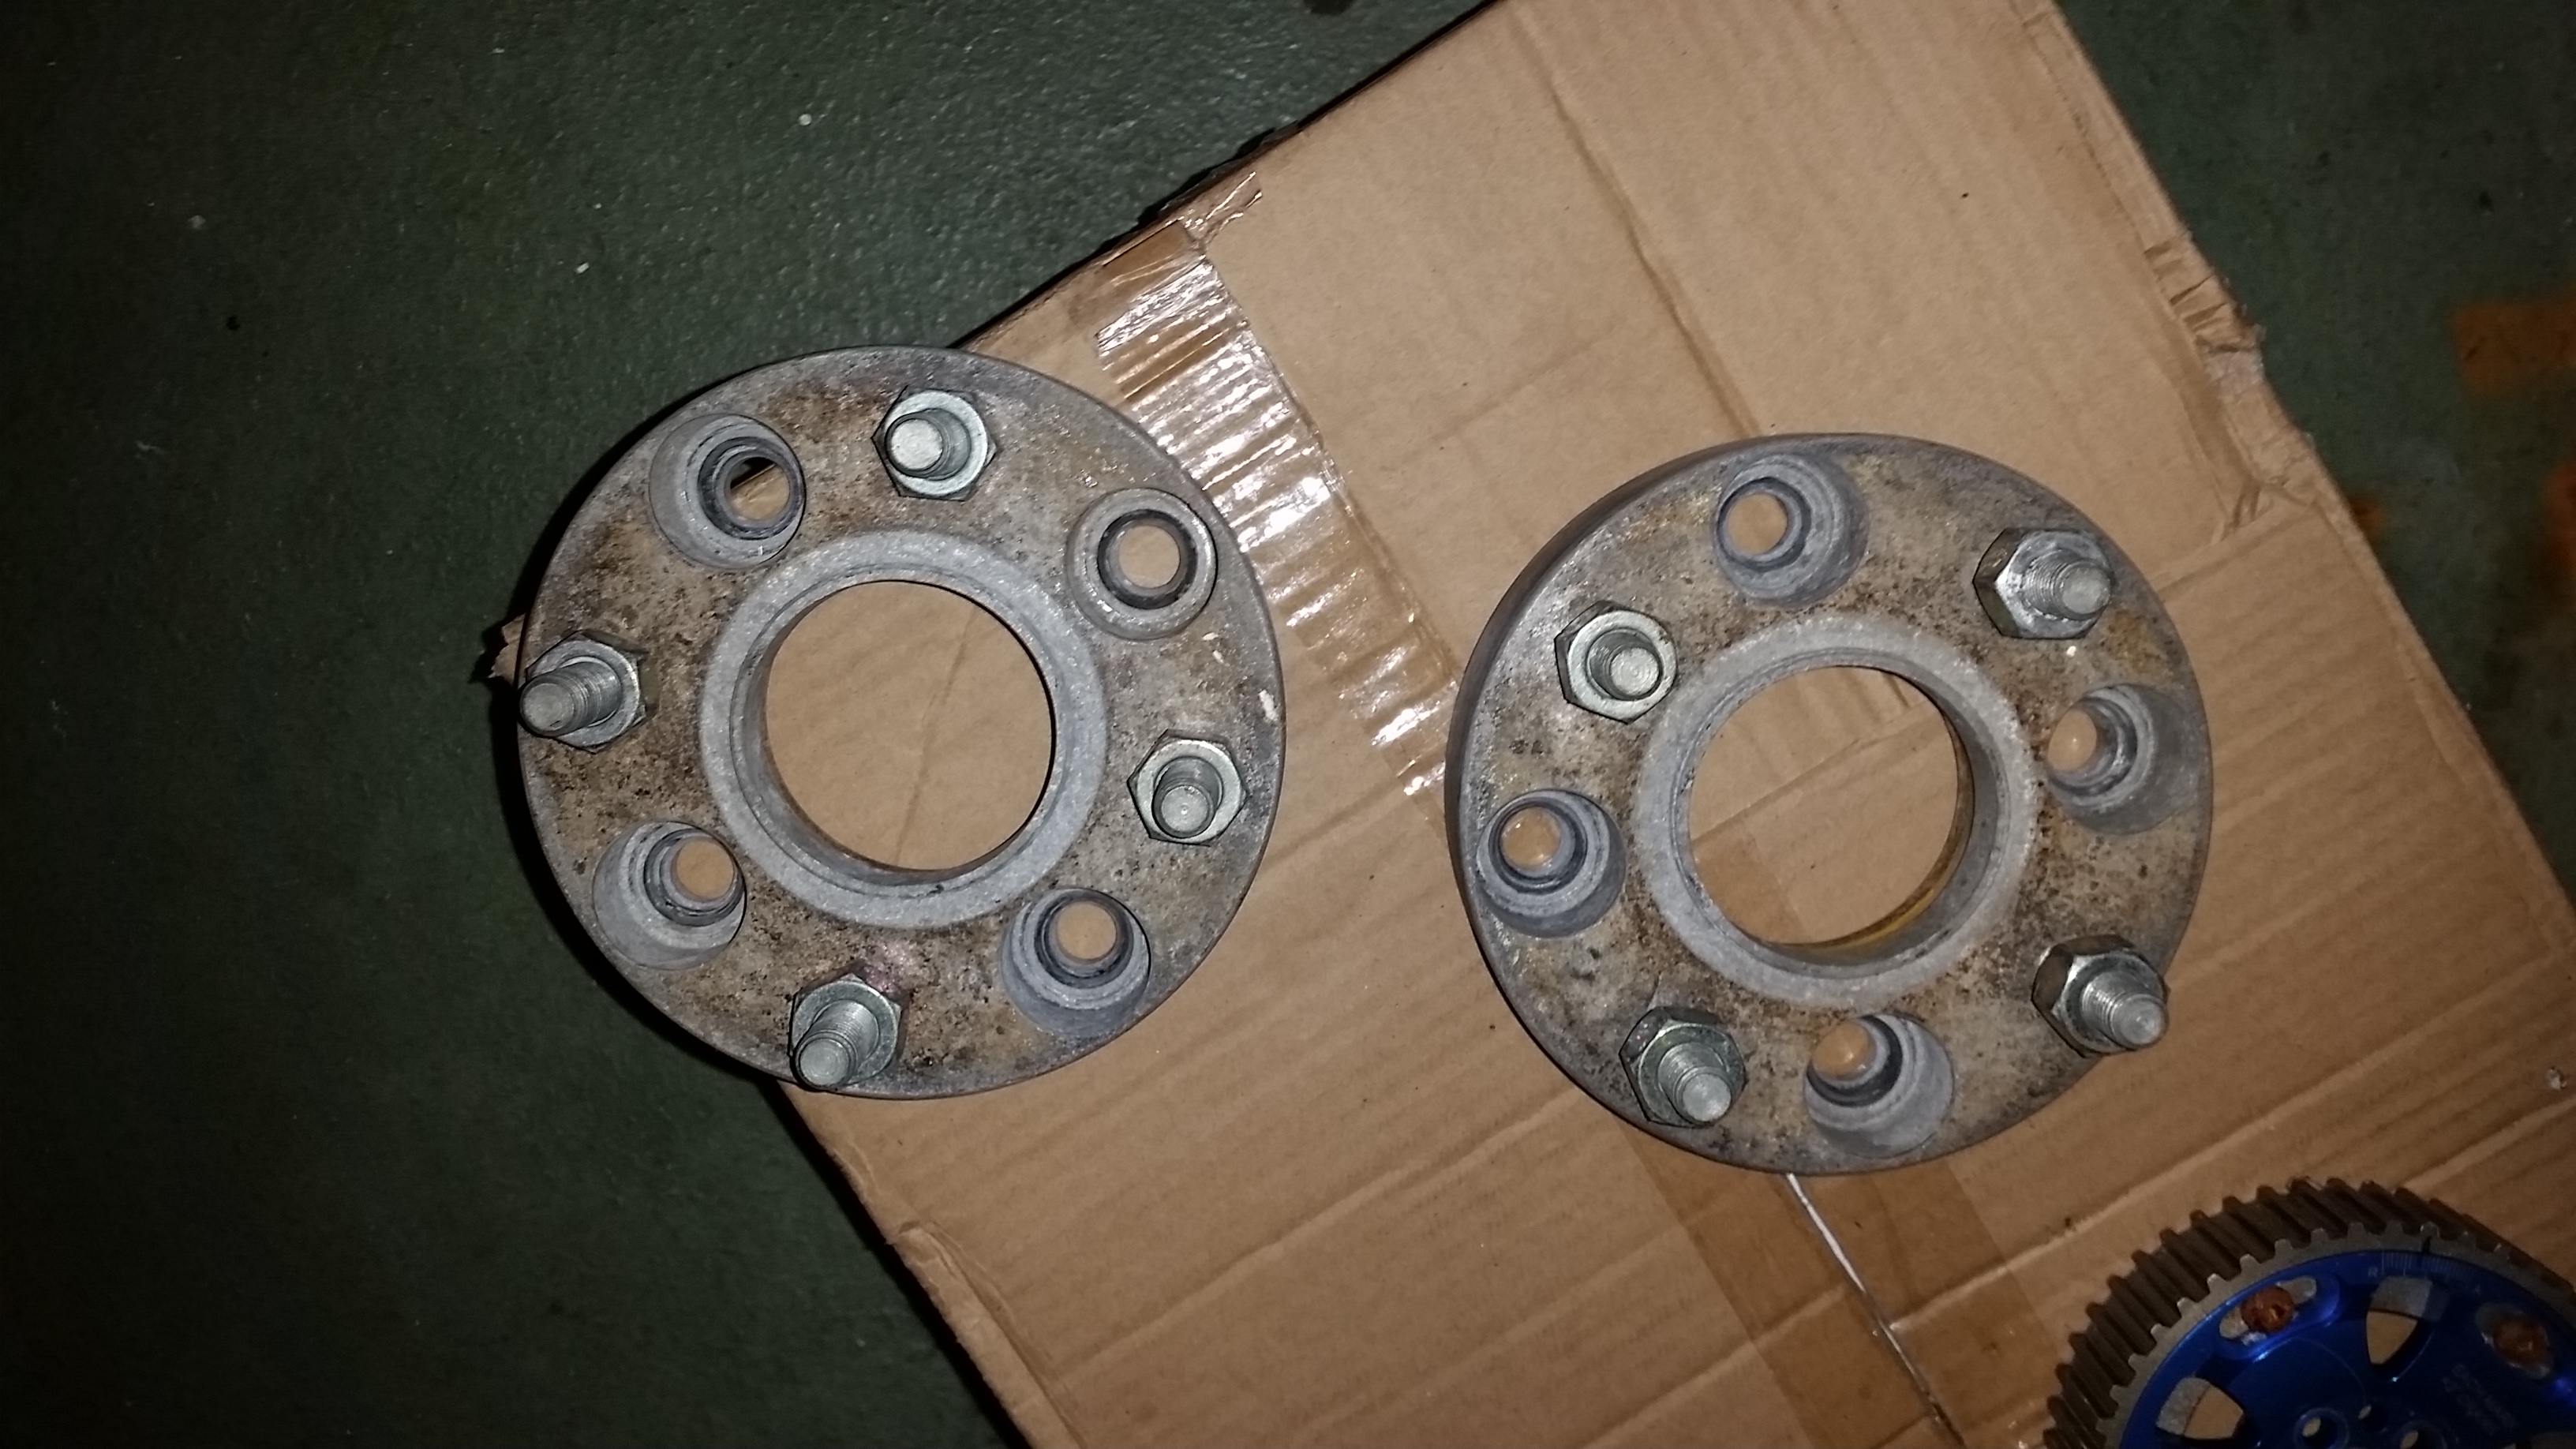 S13/rb Parts - CAM Gears, Diffs,turbos, RB Starters, ALT, PWR, Spacers